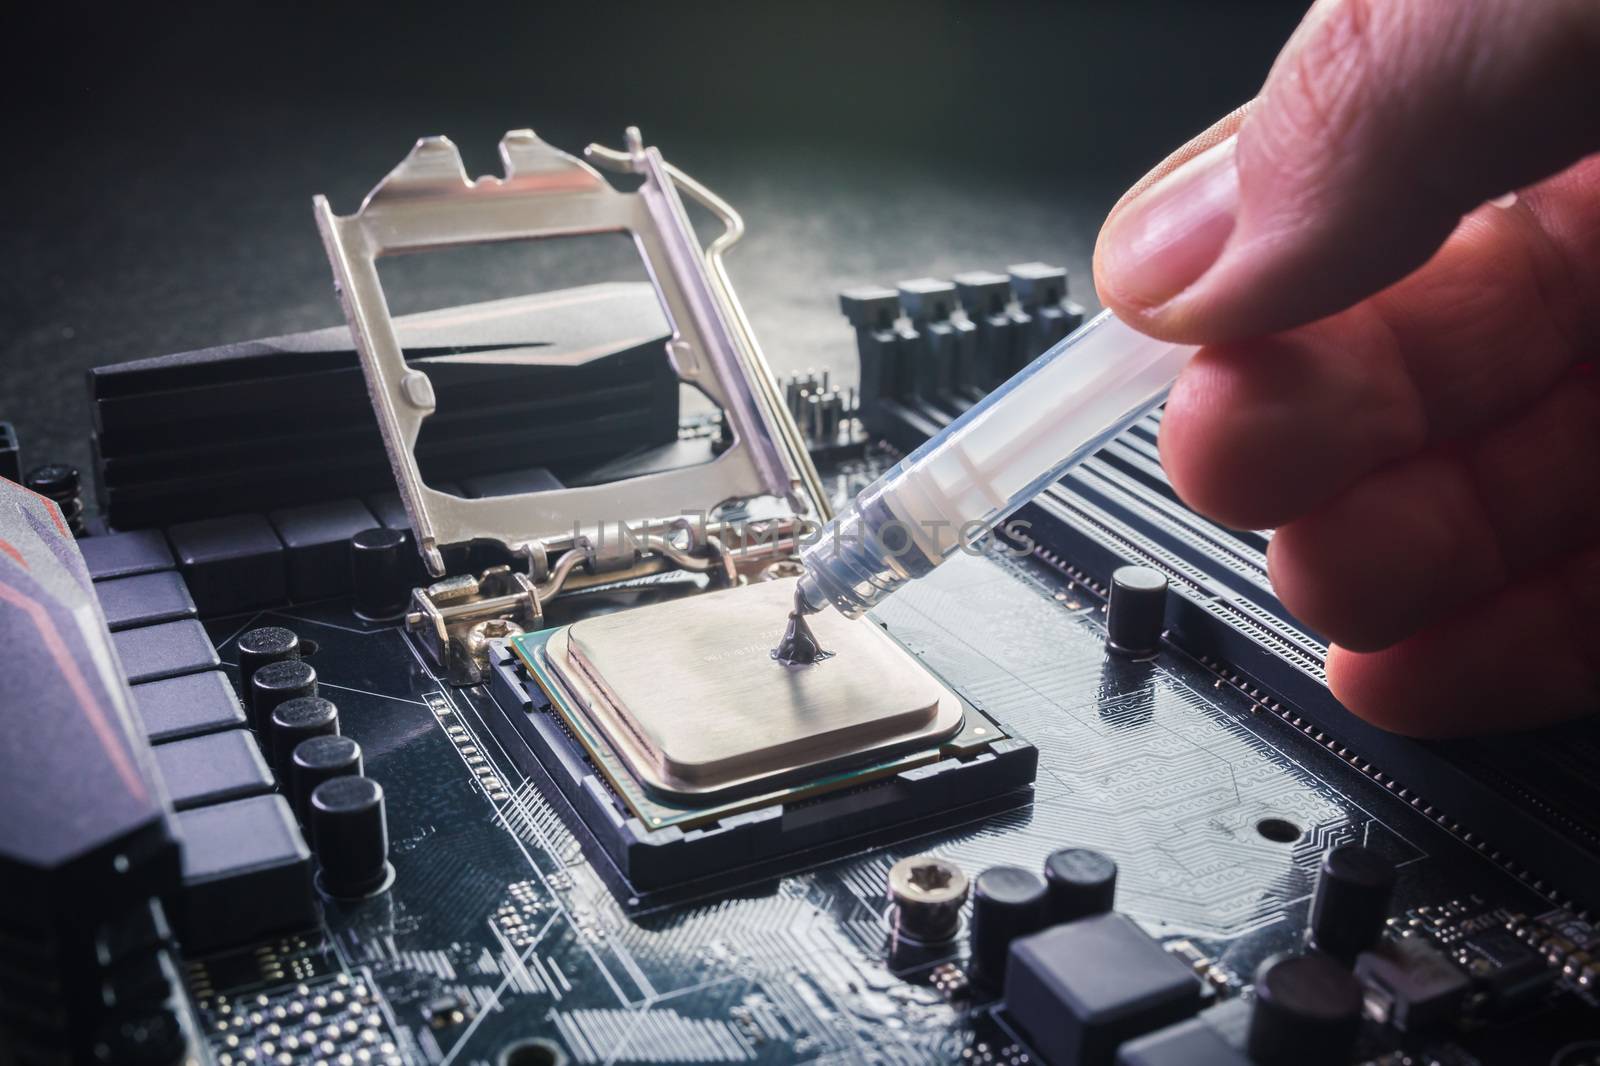 Close up to technician squeezing or application the thermal paste compound on the top of main cpu in the socket.